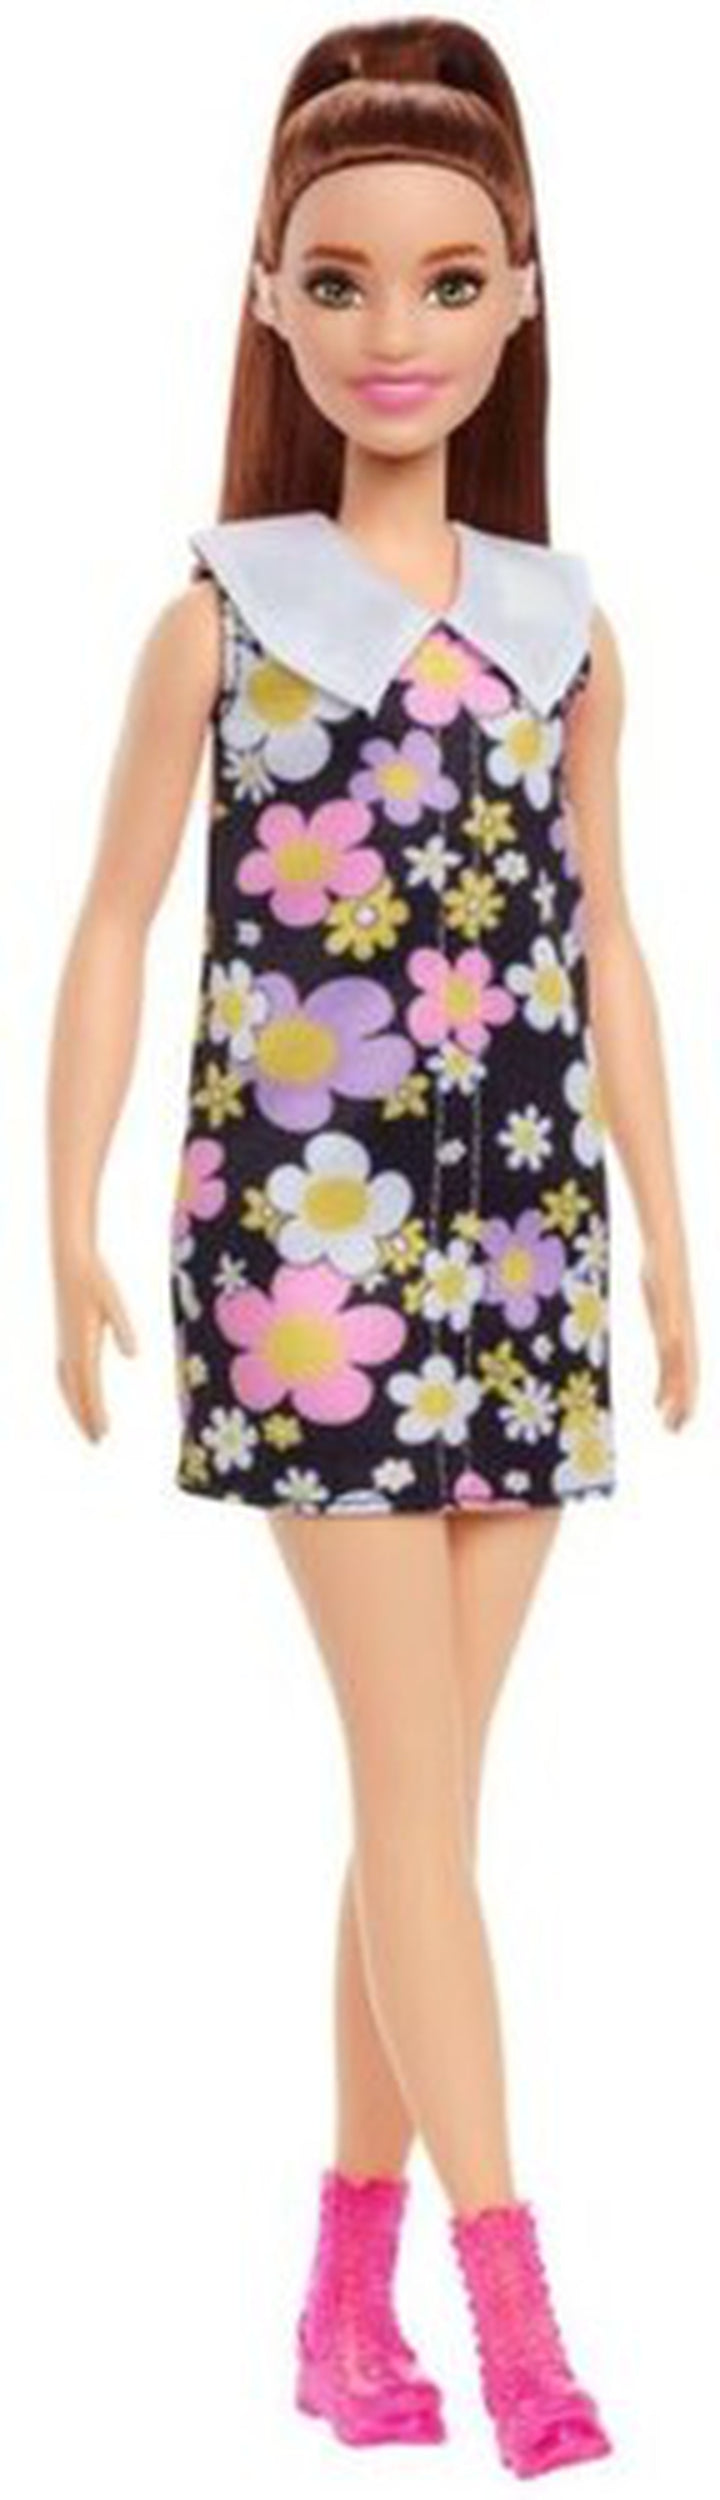 Mattel - Barbie Fashionista Doll, Daisy Print Shift Dress with White Collar, Pink Boots, Long Brown Hair in Pony Tail and Hearing Aids